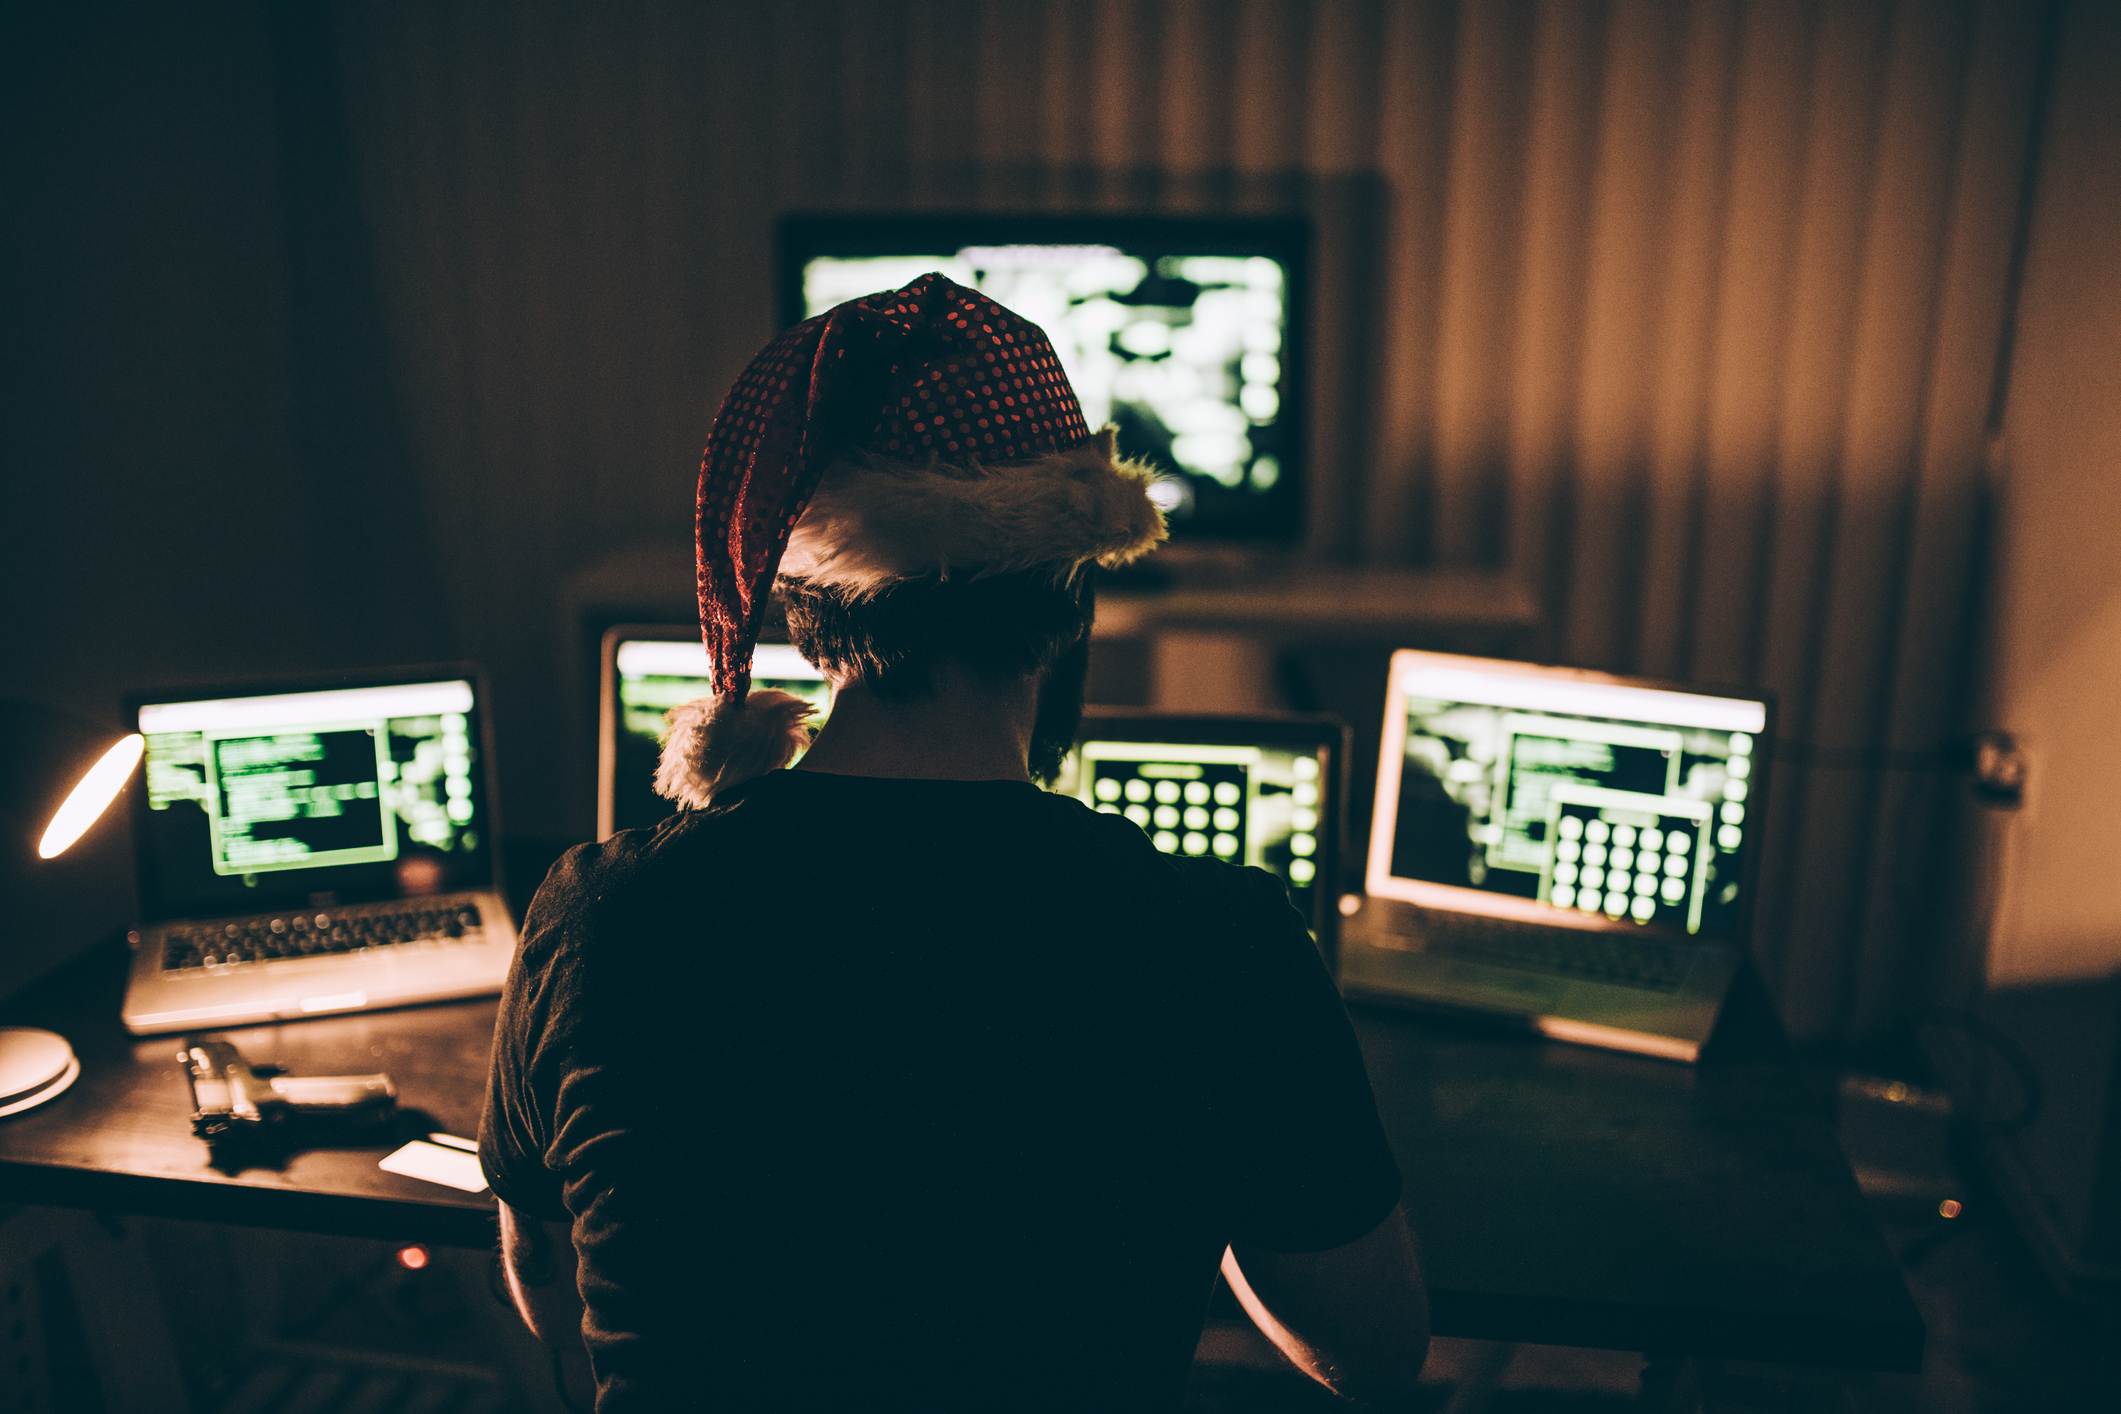 cybercriminal sitting in a dark room with holiday hat on looking at multiple computer screens